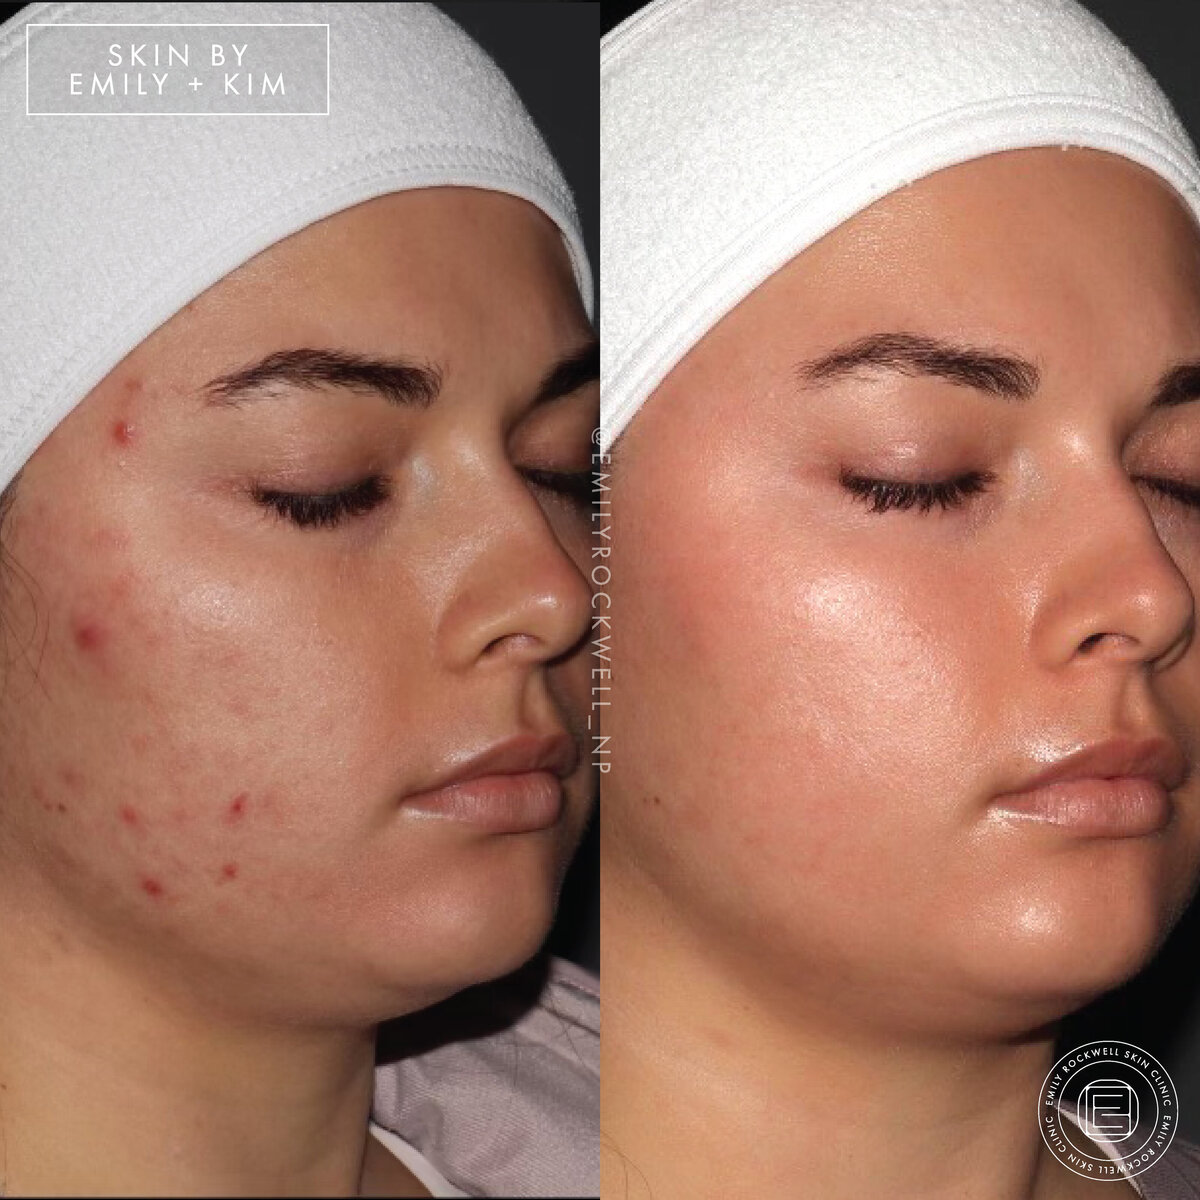 NEW ACNE SCARRING POST-13